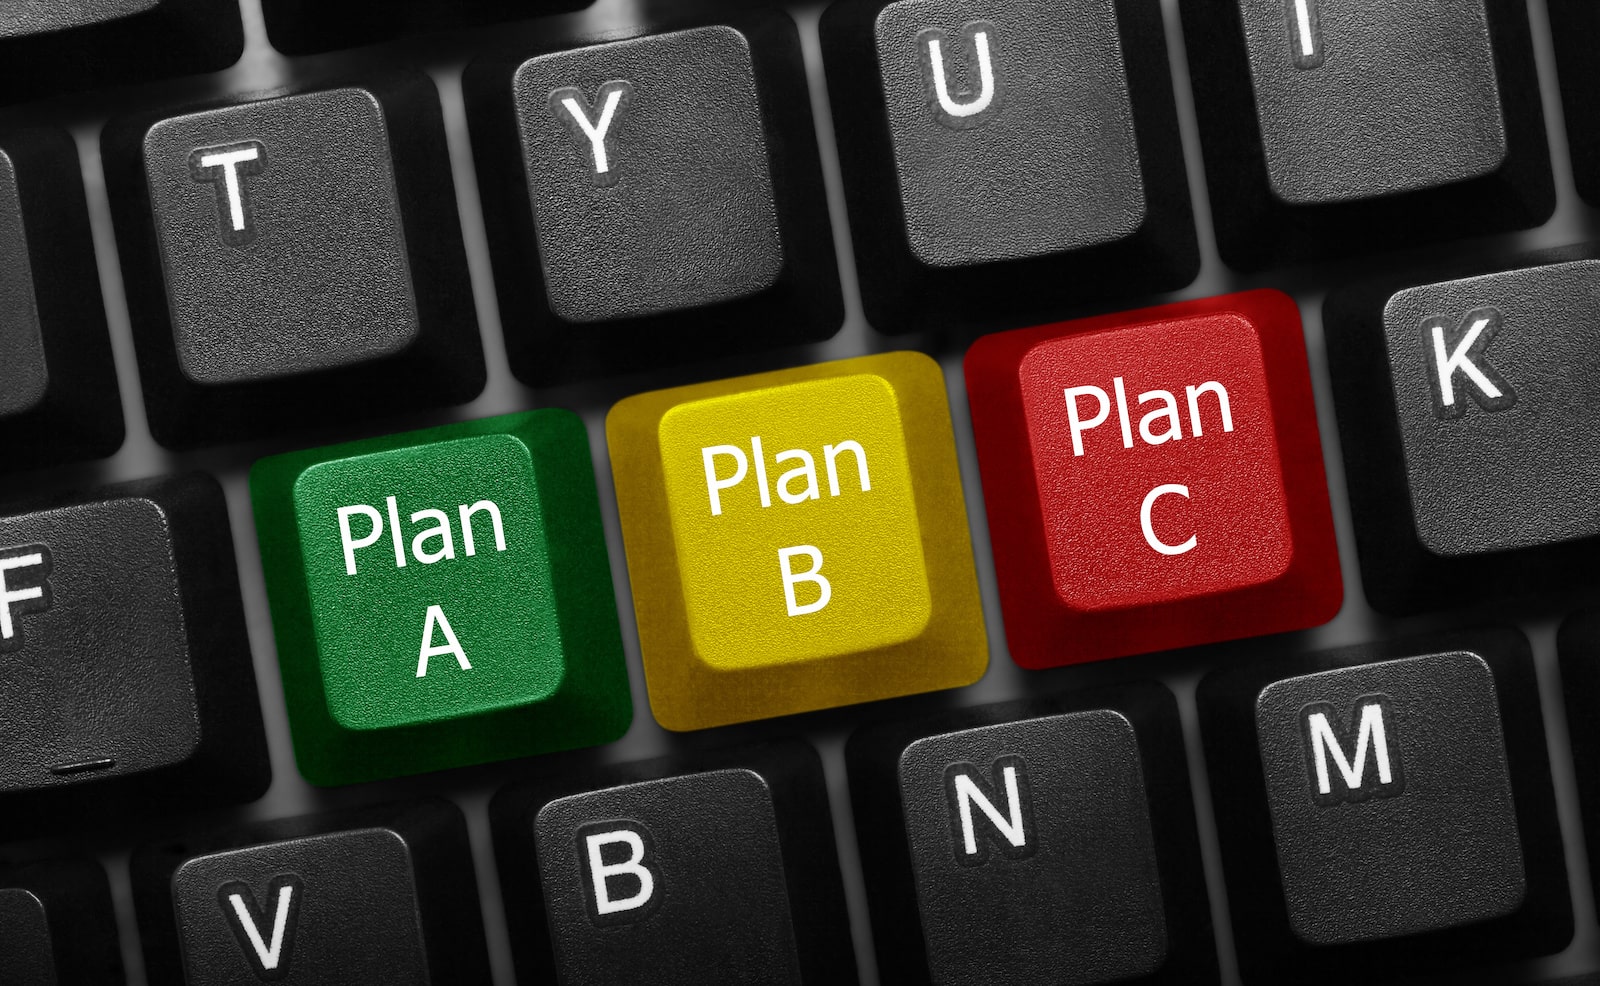 Keyboard with plan a, b, and c keys in green, yellow, and red